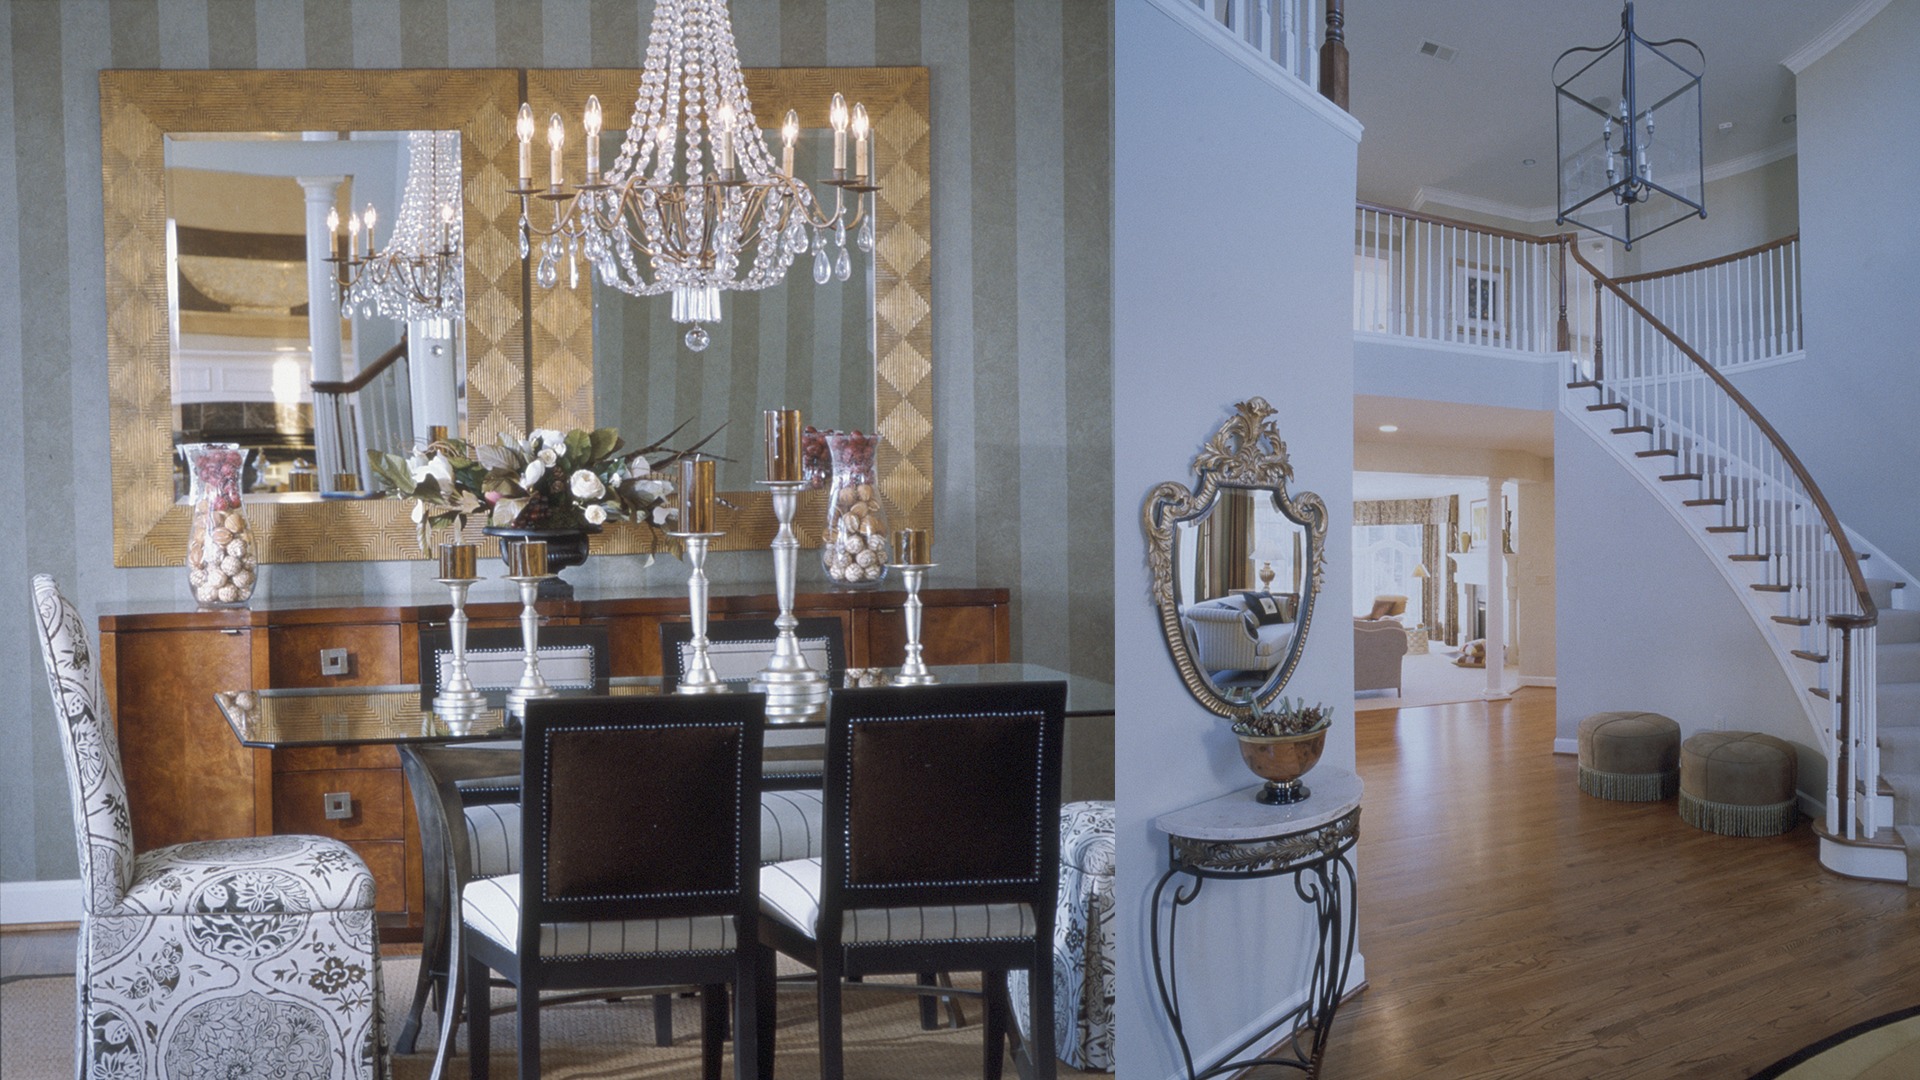 The Dining Room and Foyer in a Winthrop Manor